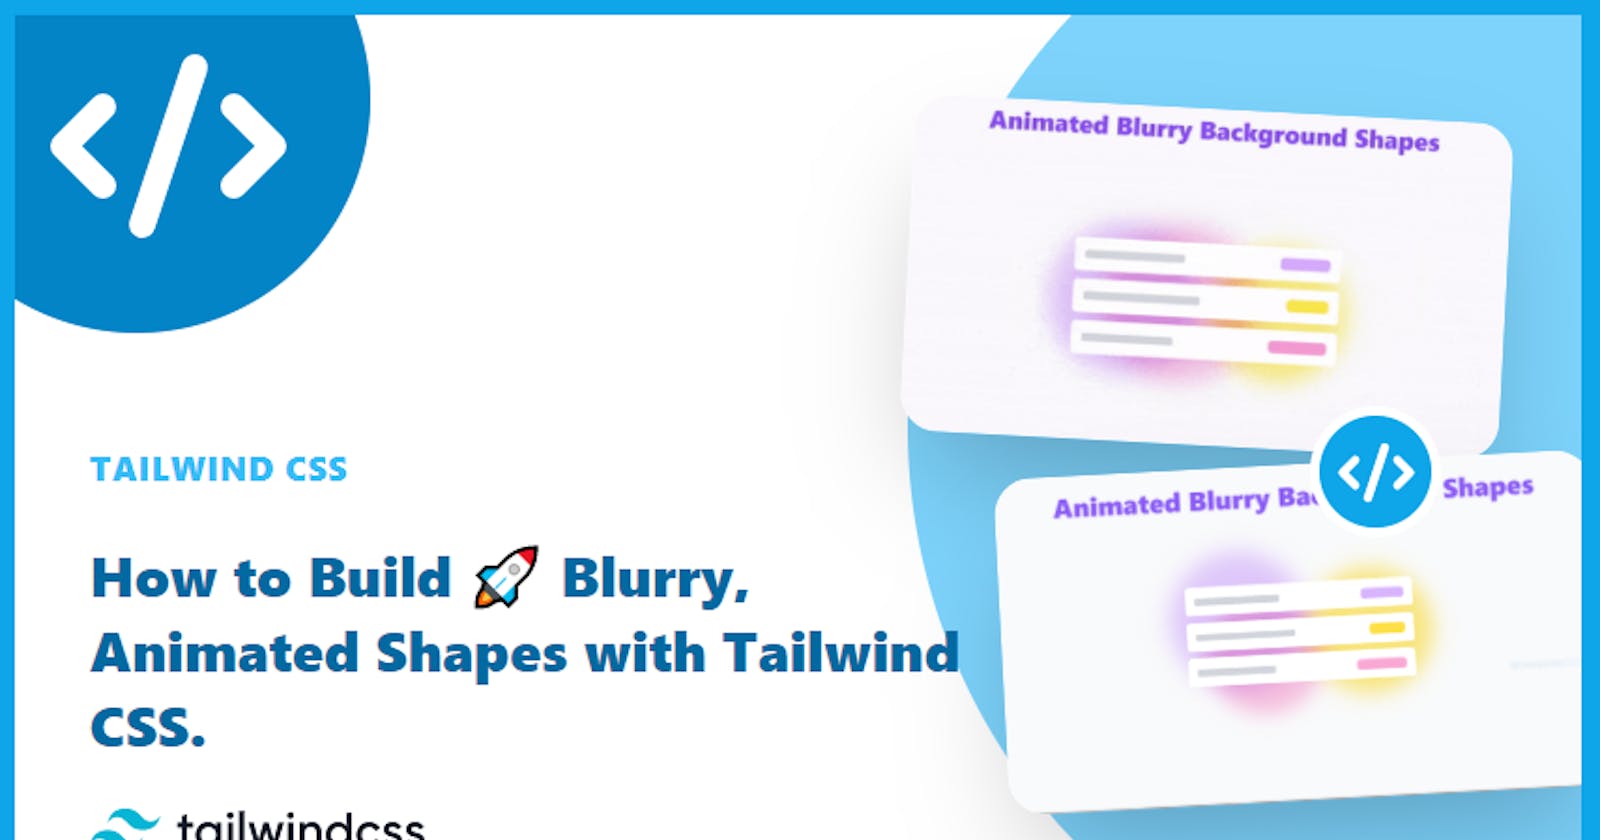 How to build Blurry, Animated Shapes with Tailwind CSS.